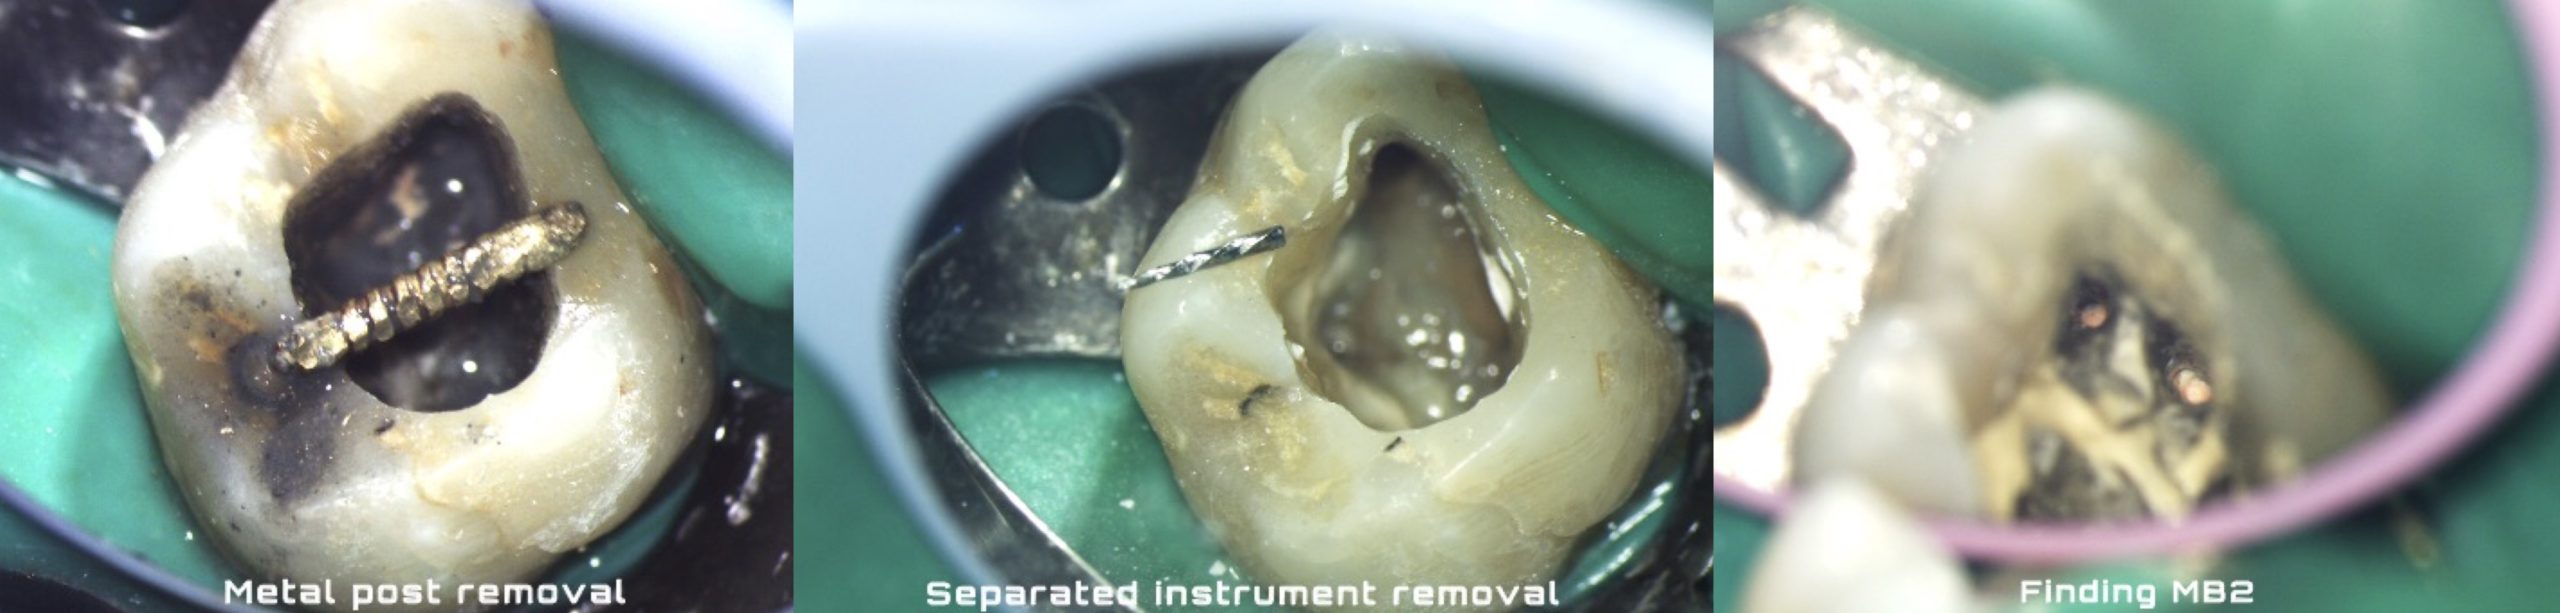 An endodontic retreatment case with multiple challenges